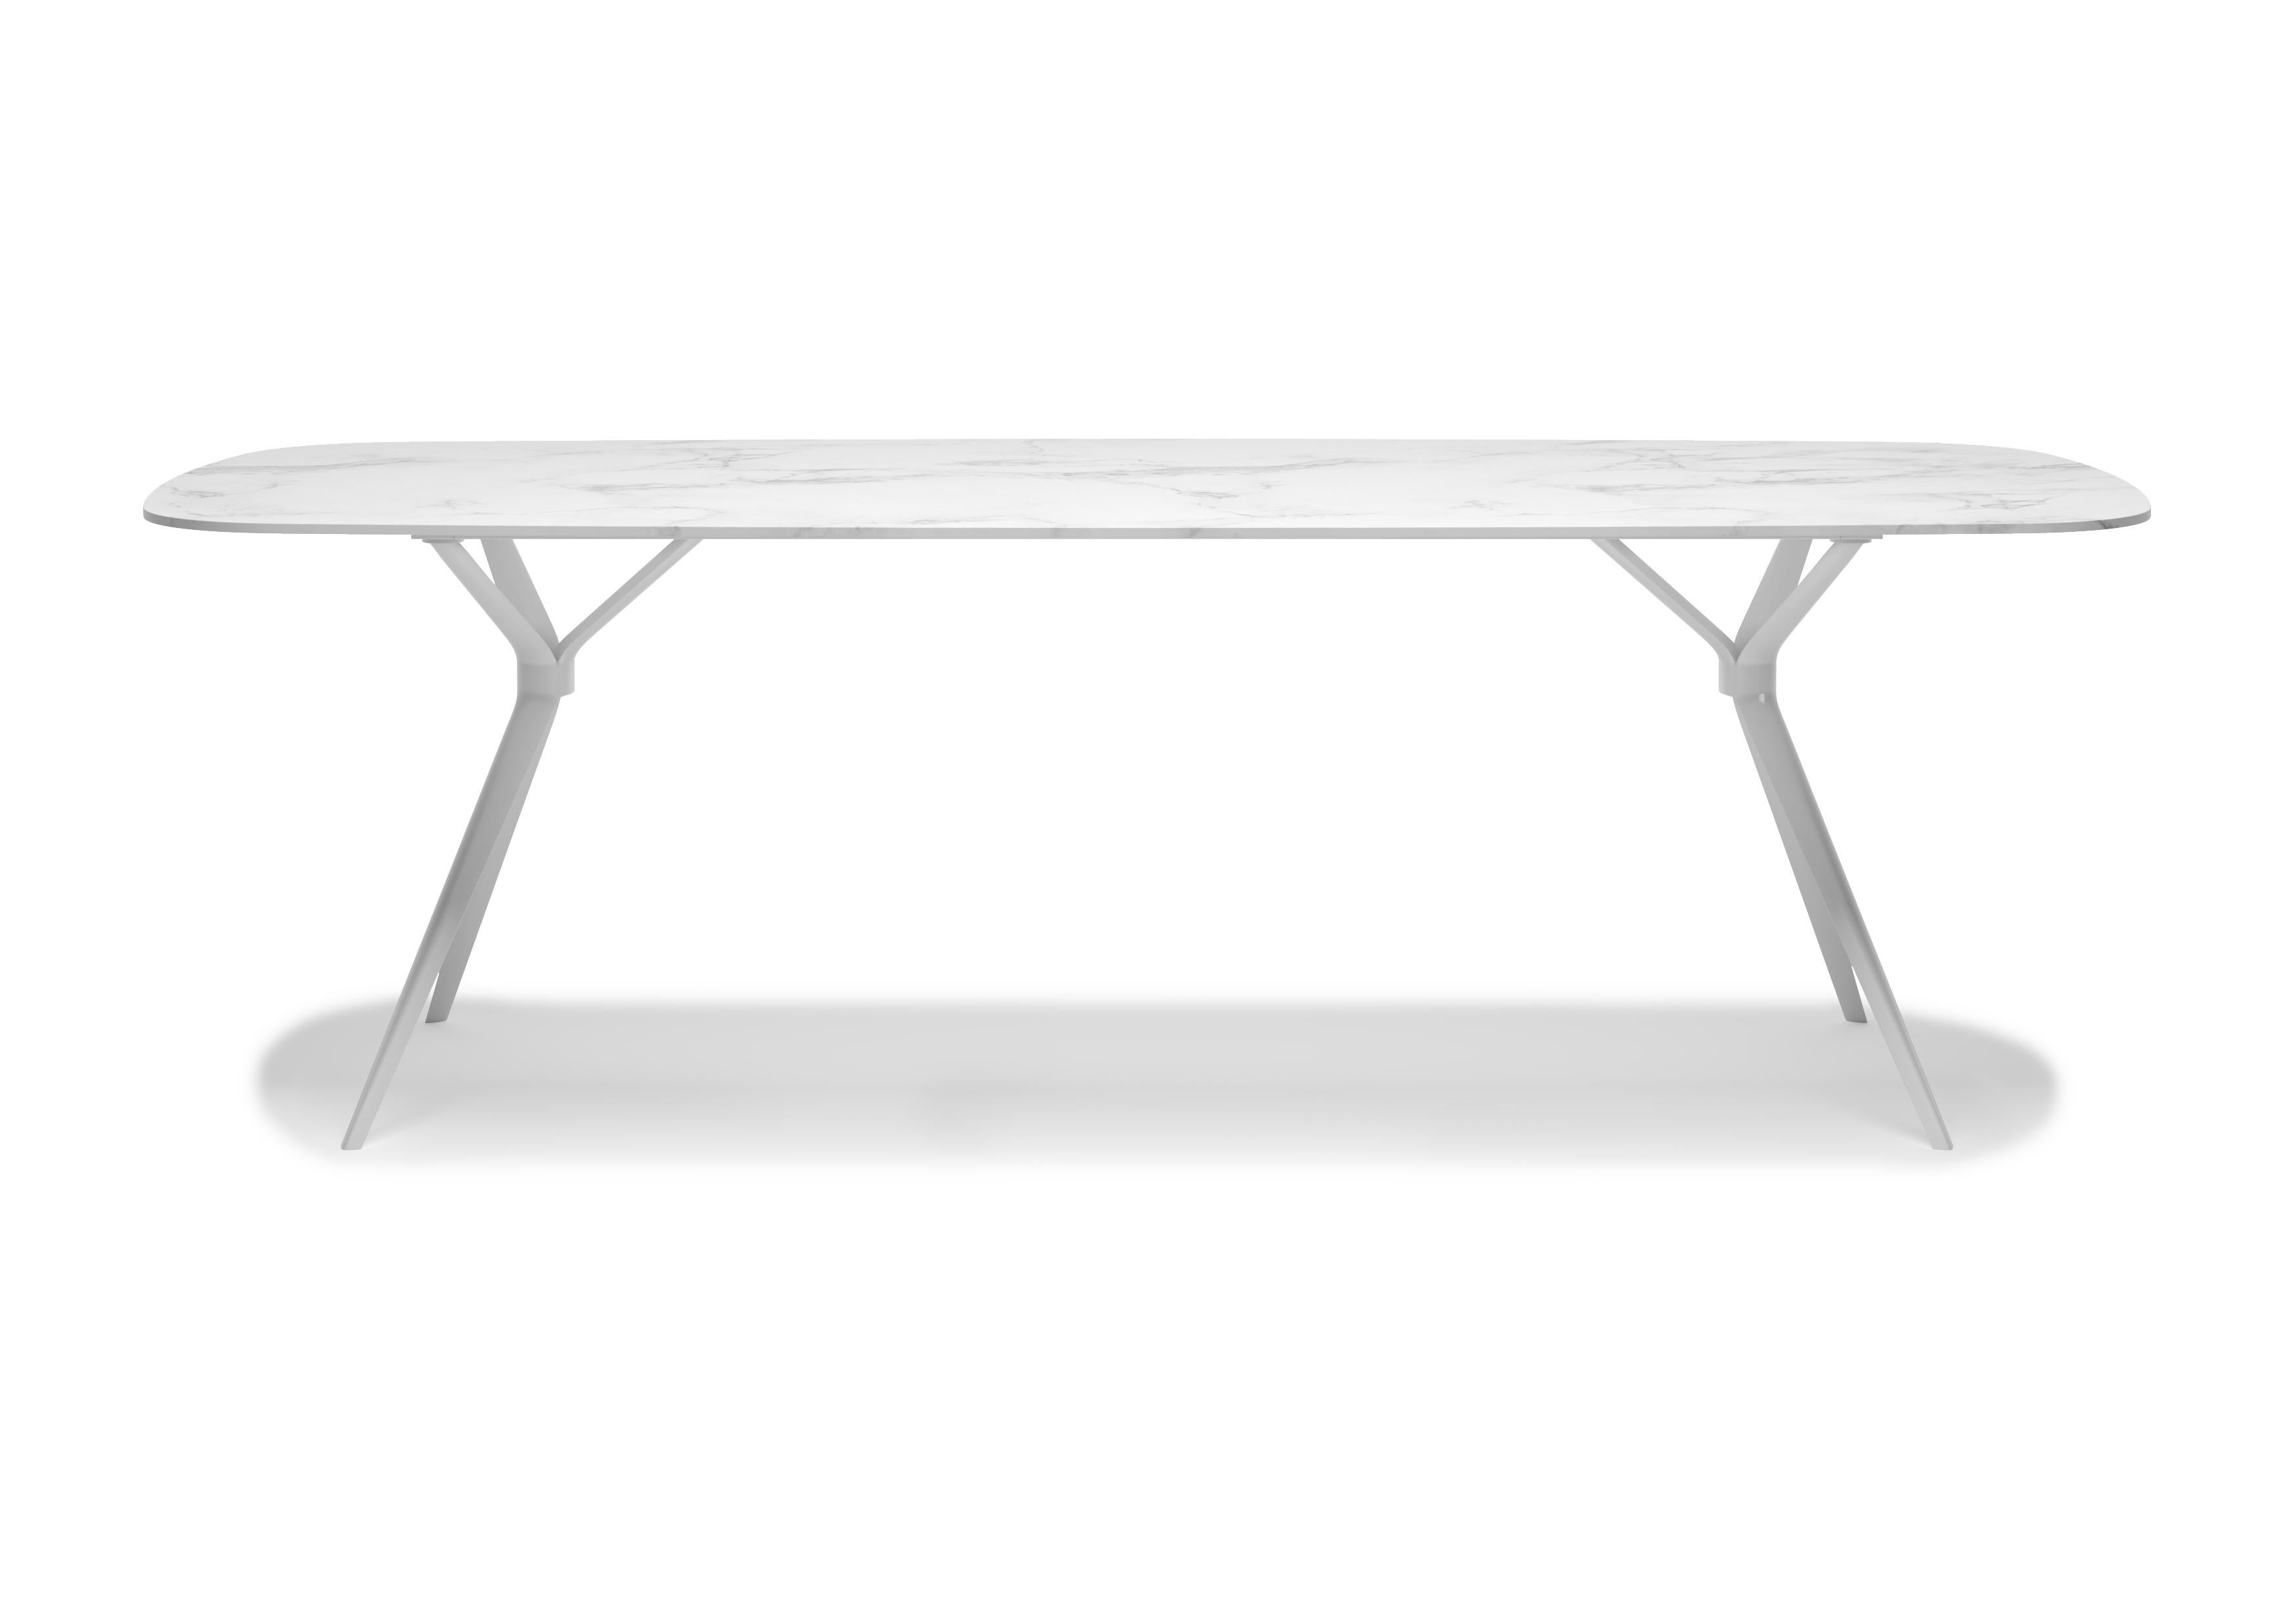 Gemma-pike is a natural stone and aluminium garden table.‎

The Gemma-pike Collection is a powerful sketch, synthesizes its rounded lines and comfort, it incorporates the power of contrast into the entire design and deepens the open space